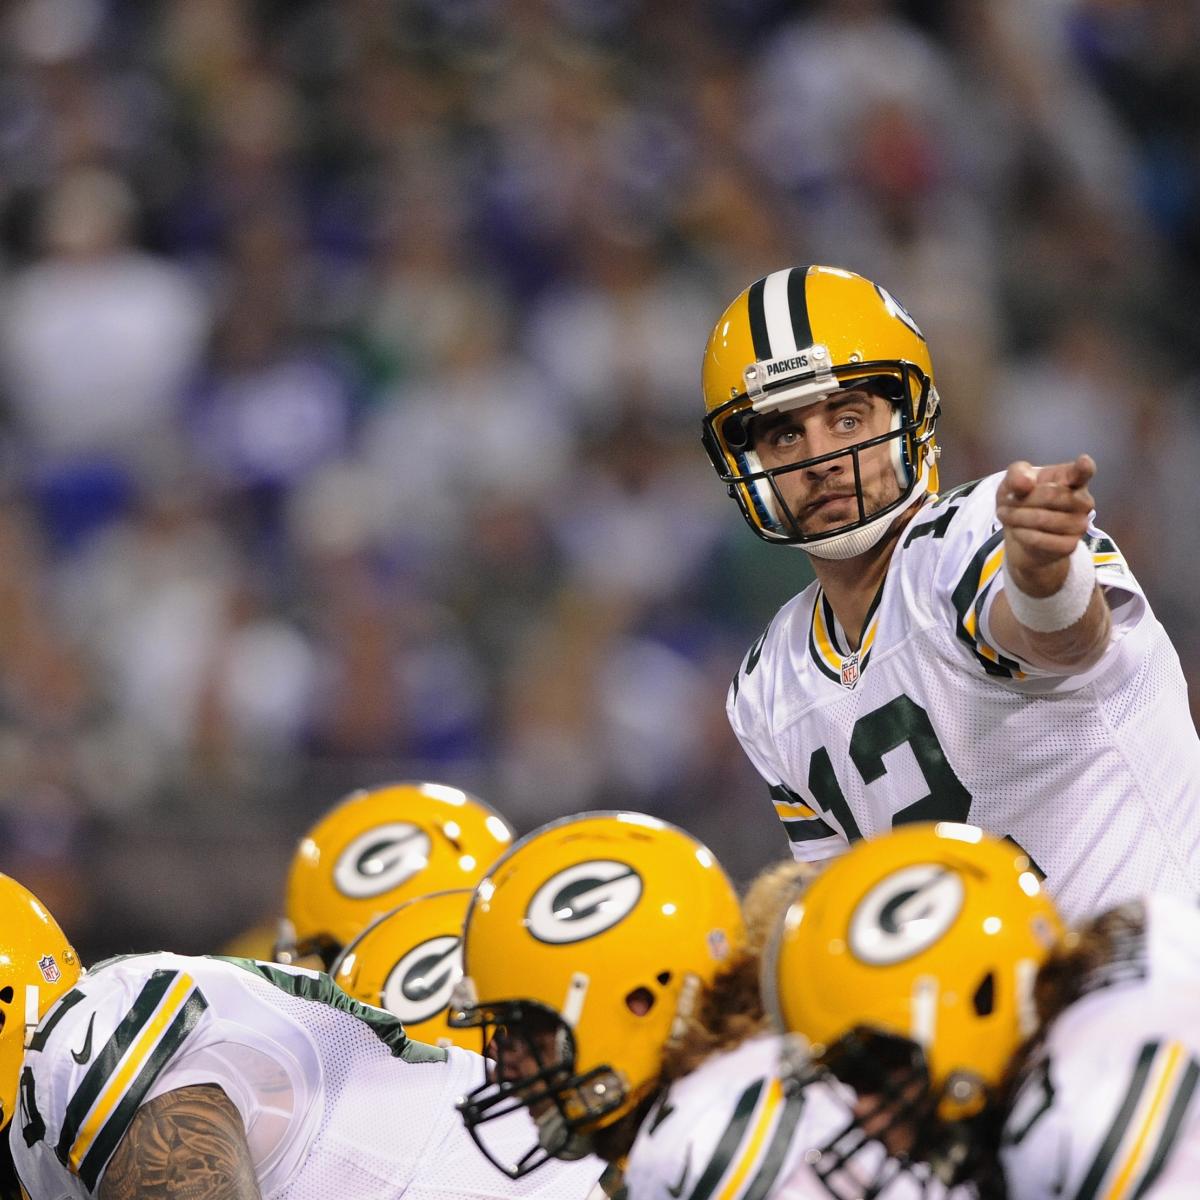 Packers vs. Vikings Live Score, Highlights and Analysis News, Scores